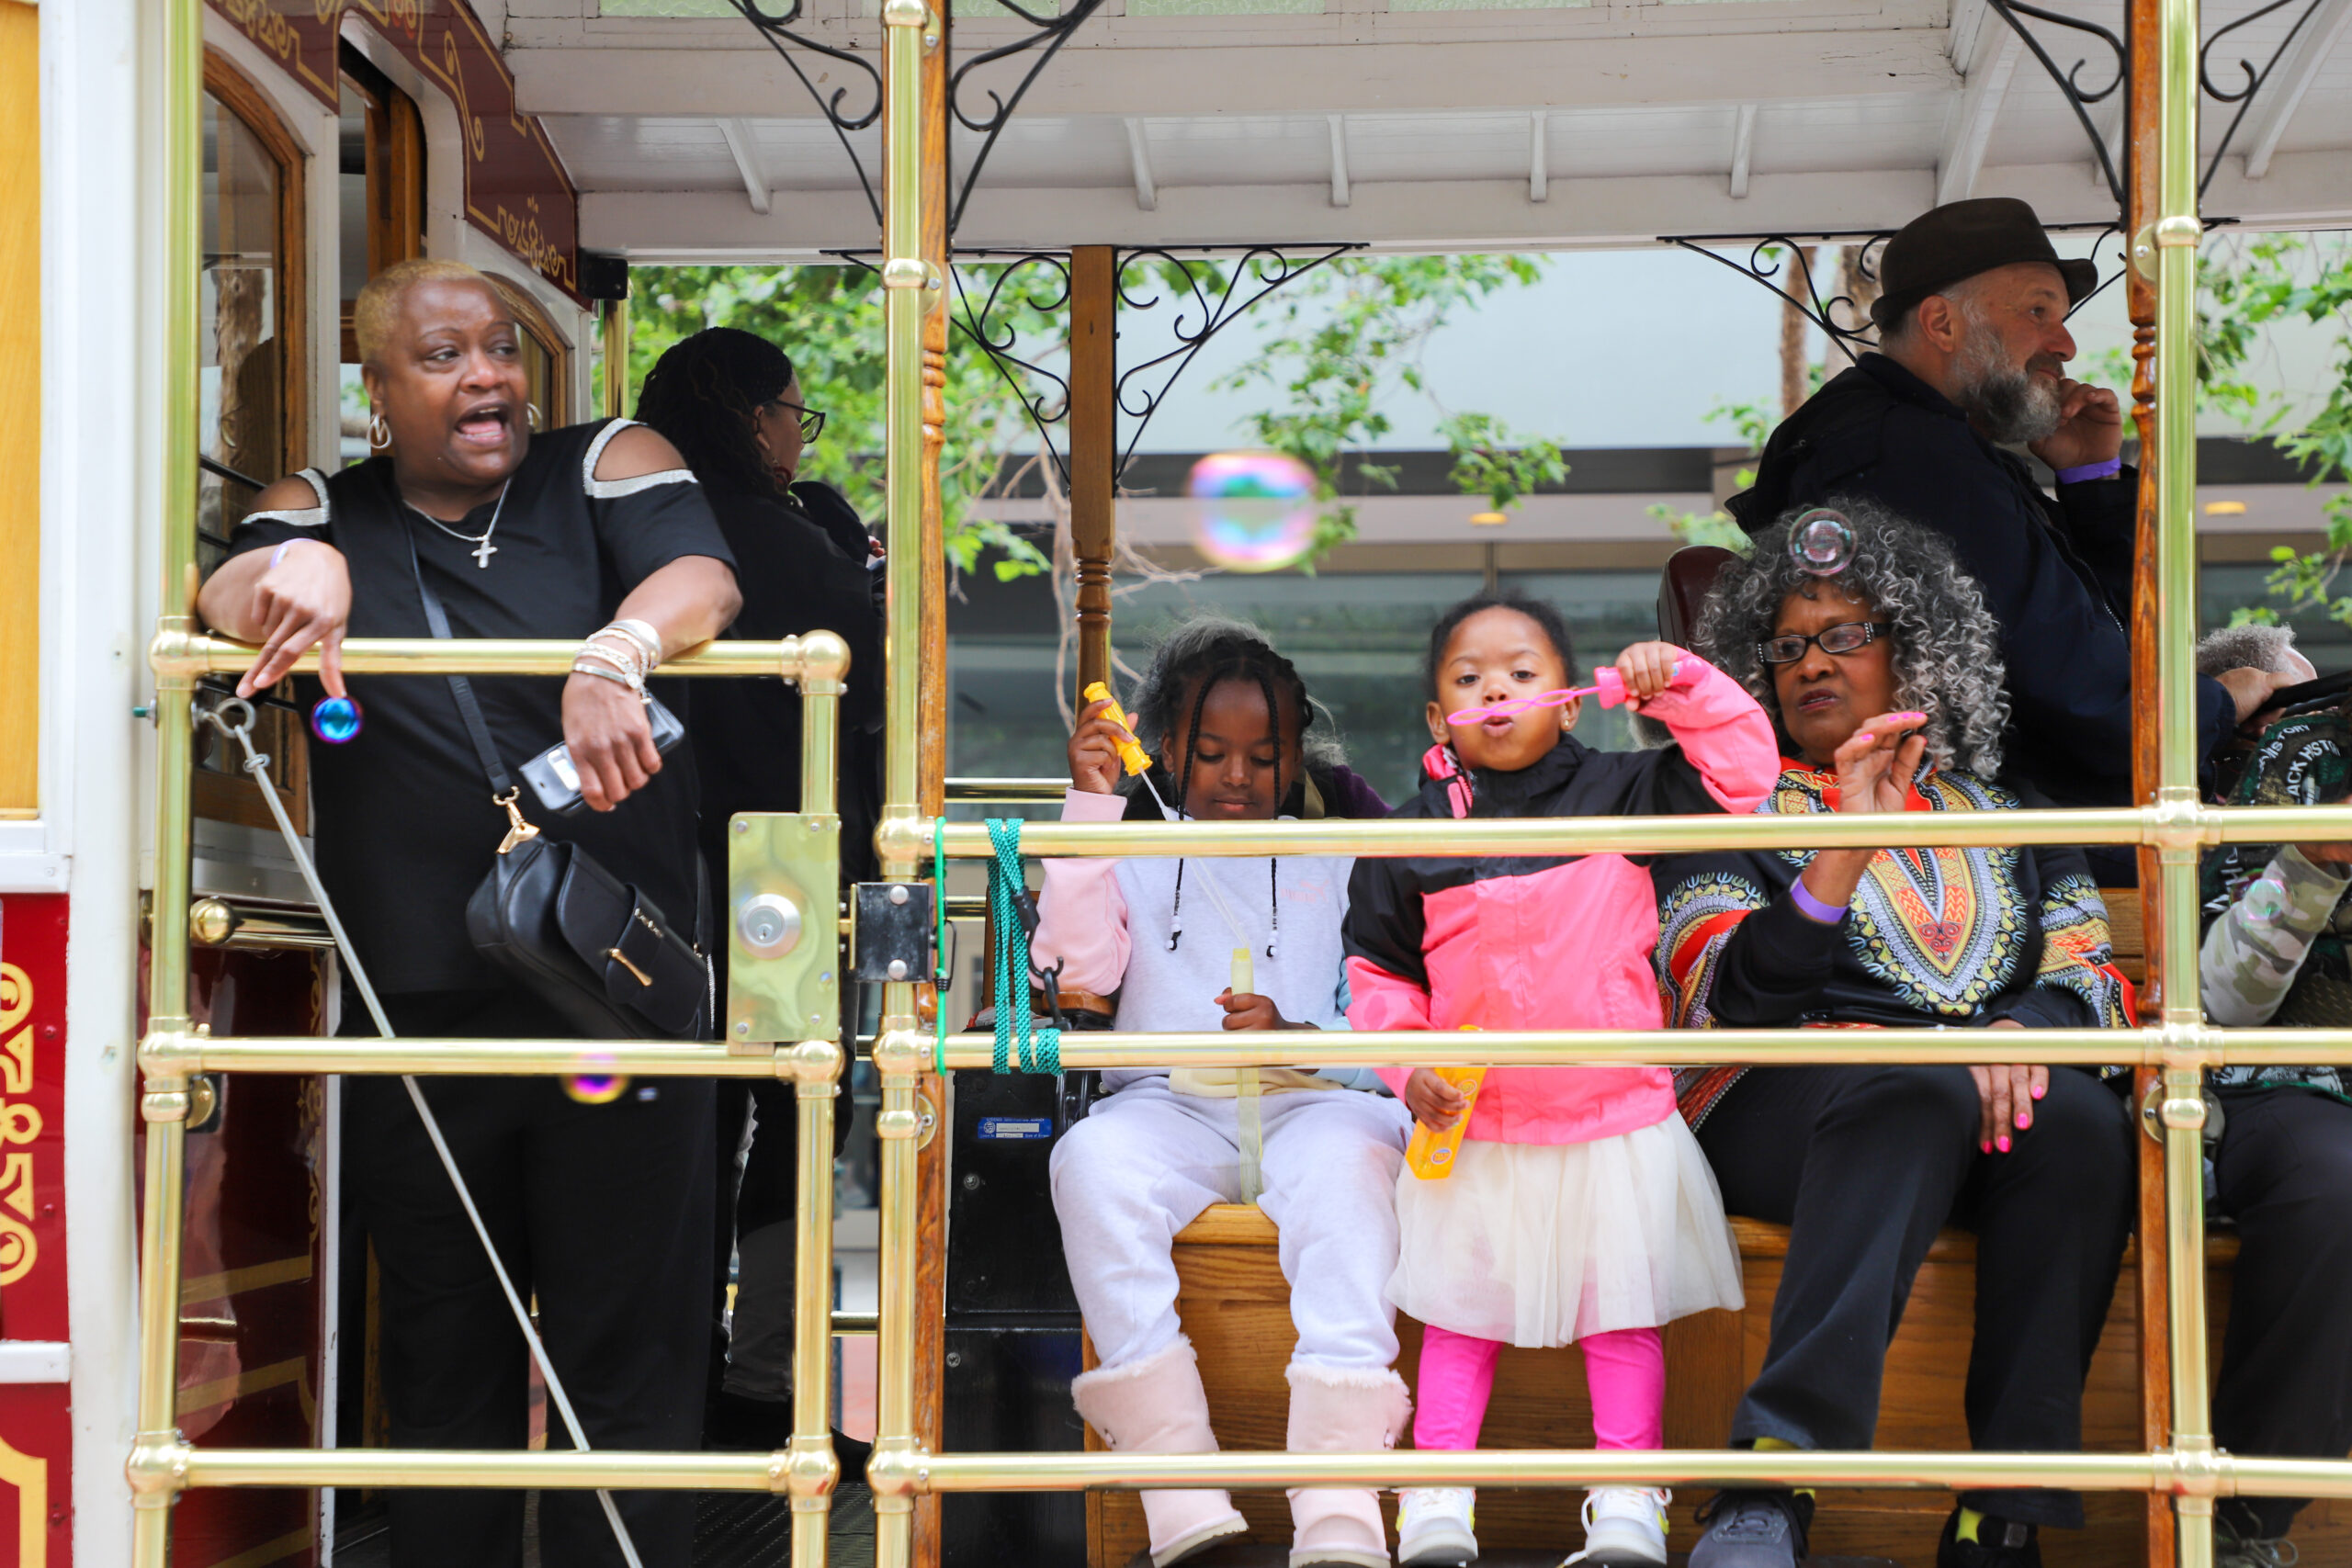 People of various ages are riding a trolley, some blowing bubbles, with joyful expressions.